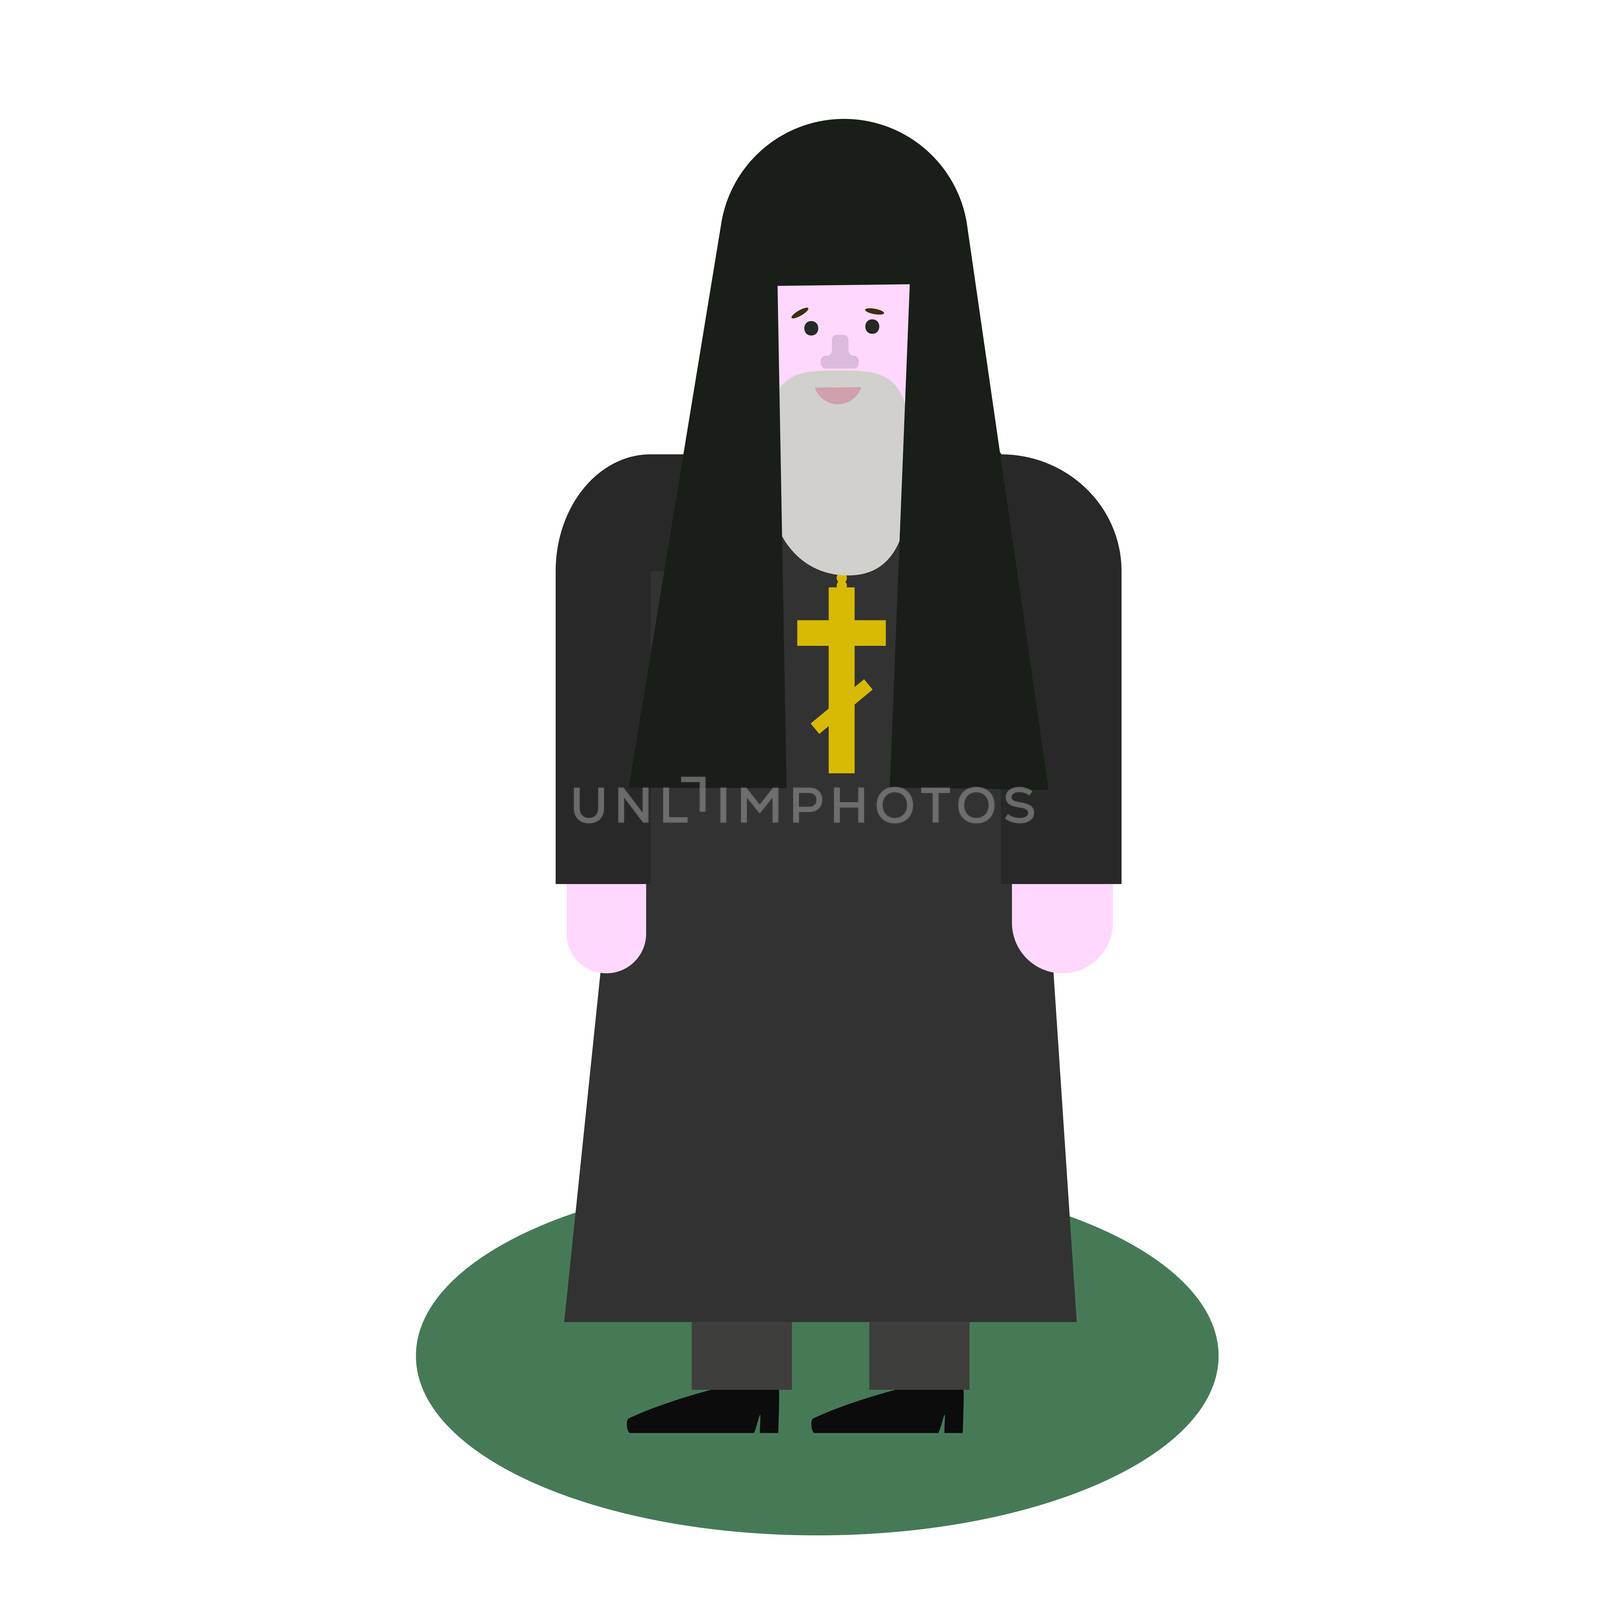 Catholic priest. Pastor reads prayer, holds cross, bible and gospel, bless parishioners. Flat cartoon illustration. Objects isolated on a white background